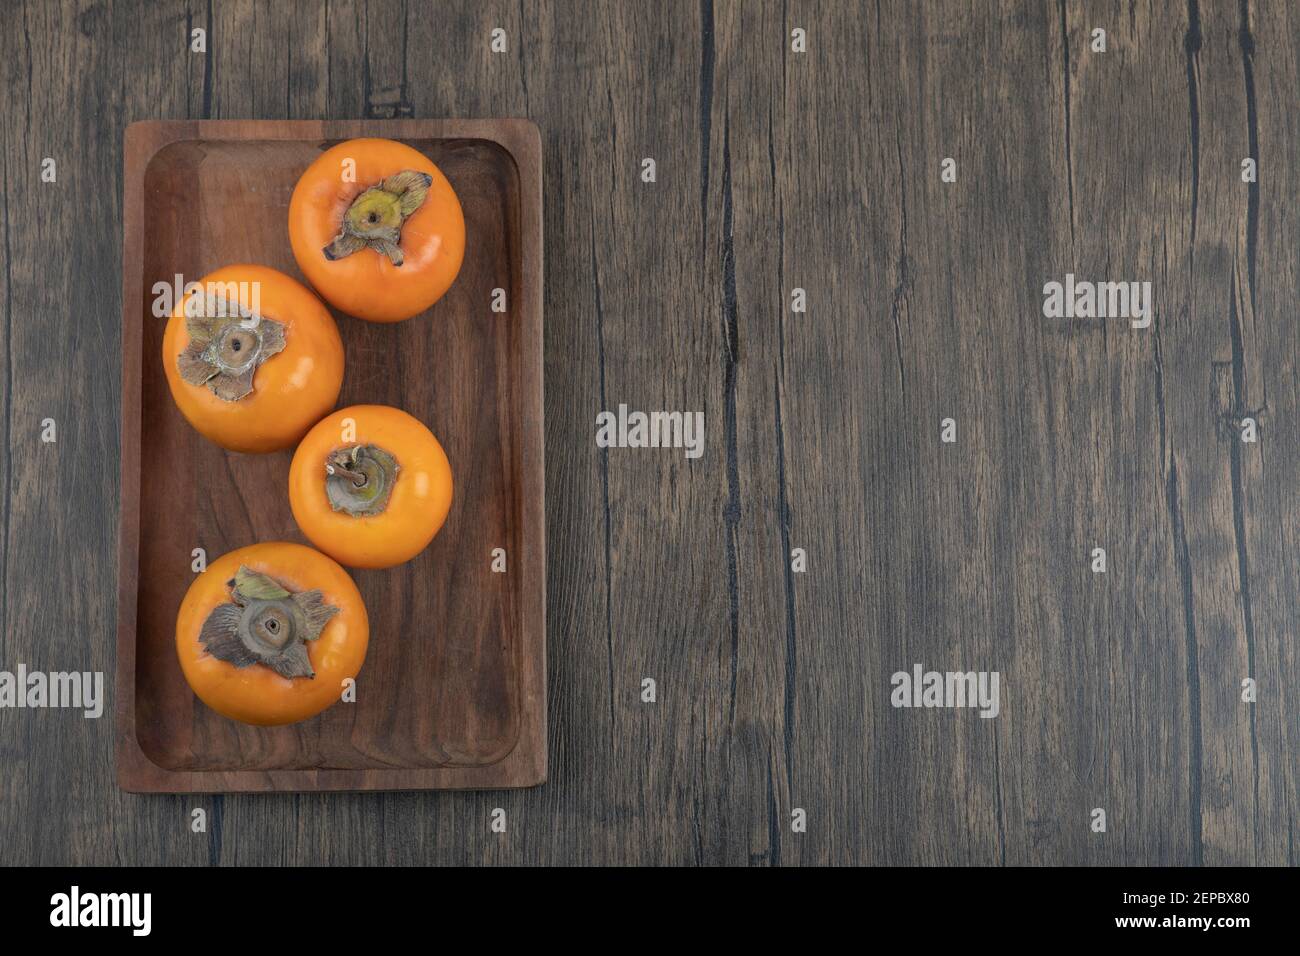 Plate of tasty fuyu persimmon fruits on wooden surface Stock Photo